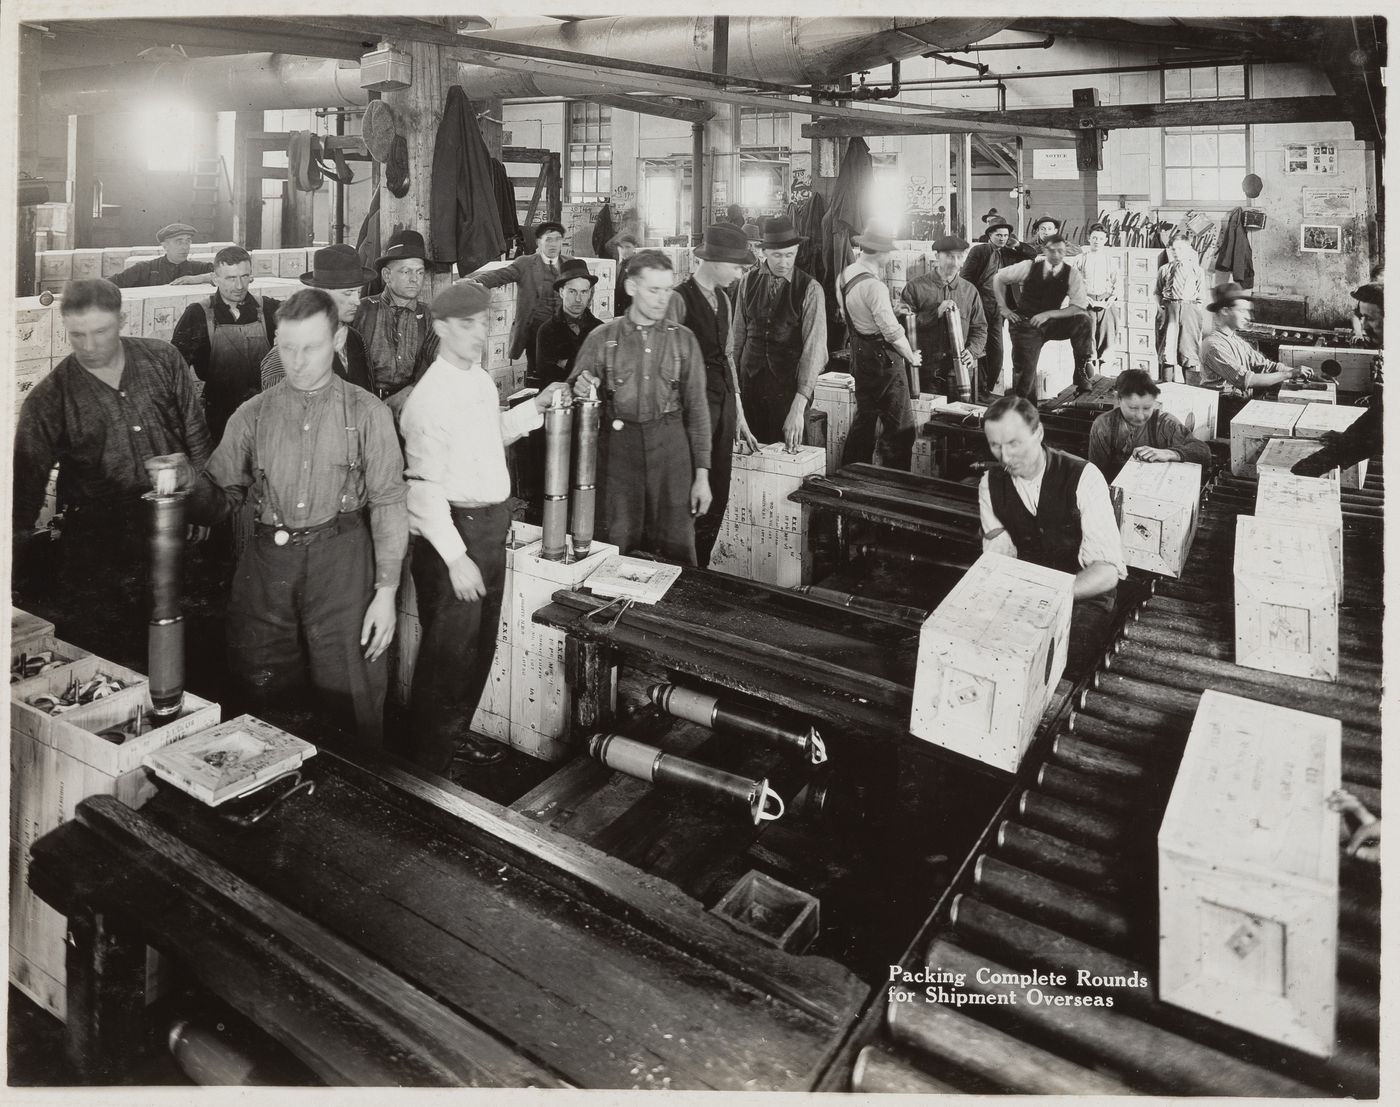 Interior view of workers packing complete rounds for shipment at the Energite Explosives Plant No. 3, the Shell Loading Plant, Renfrew, Ontario, Canada